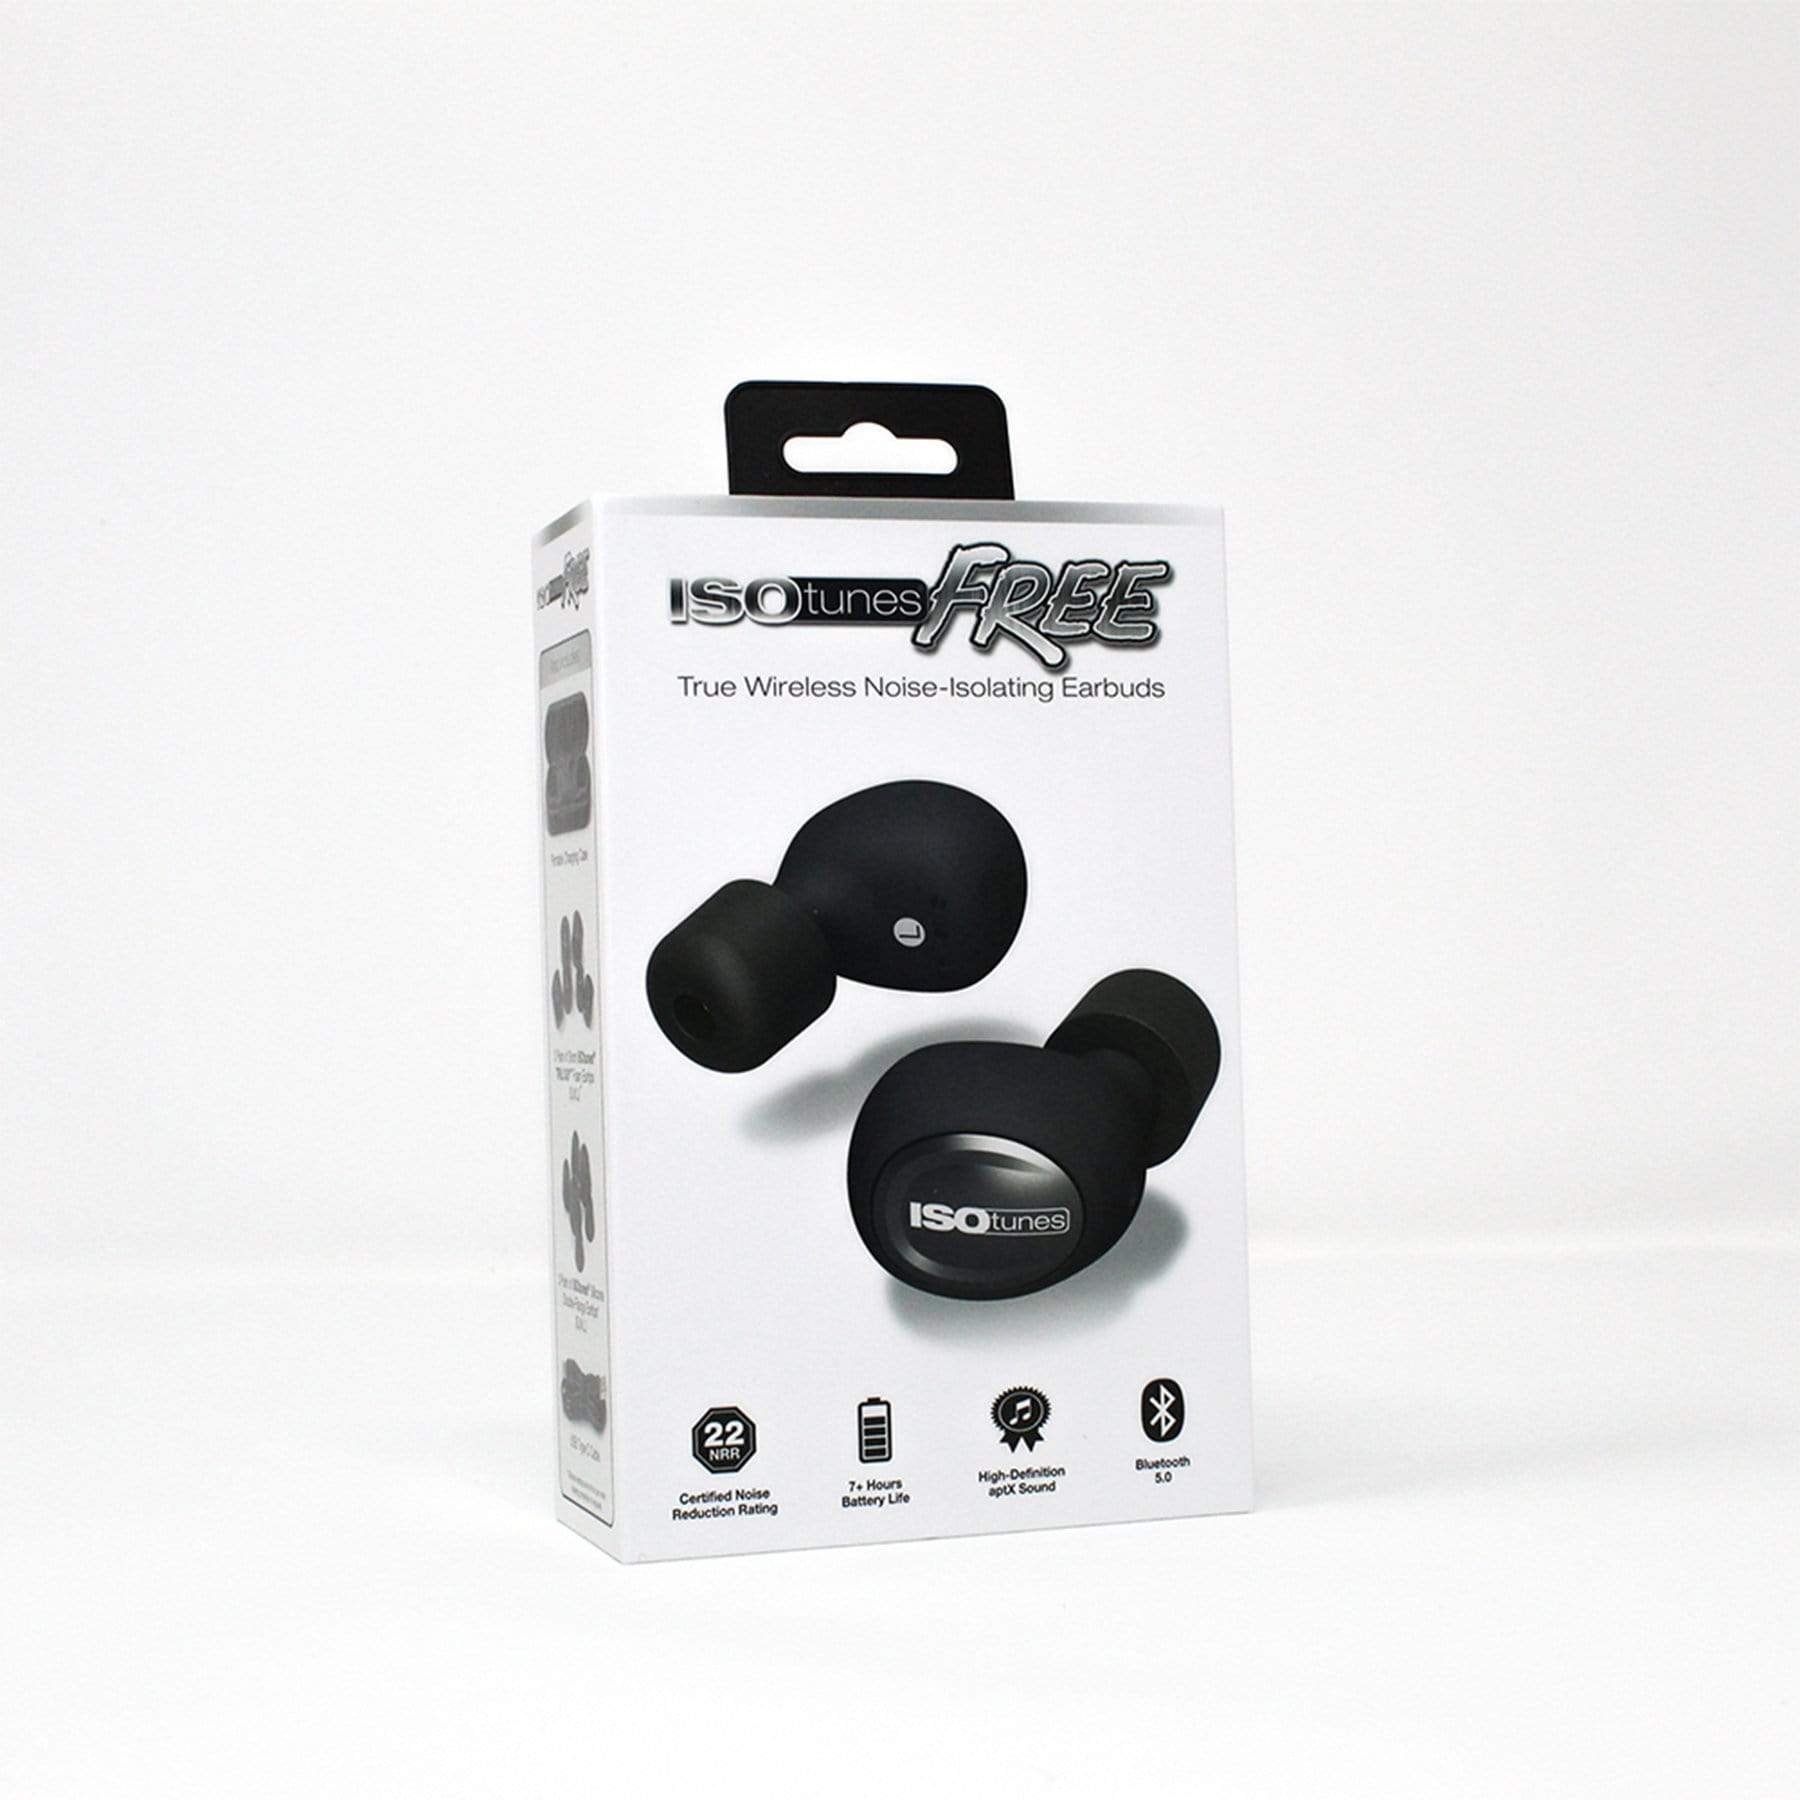 ISOtunes FREE Black Earbuds Hearing Protection Bluetooth Enabled